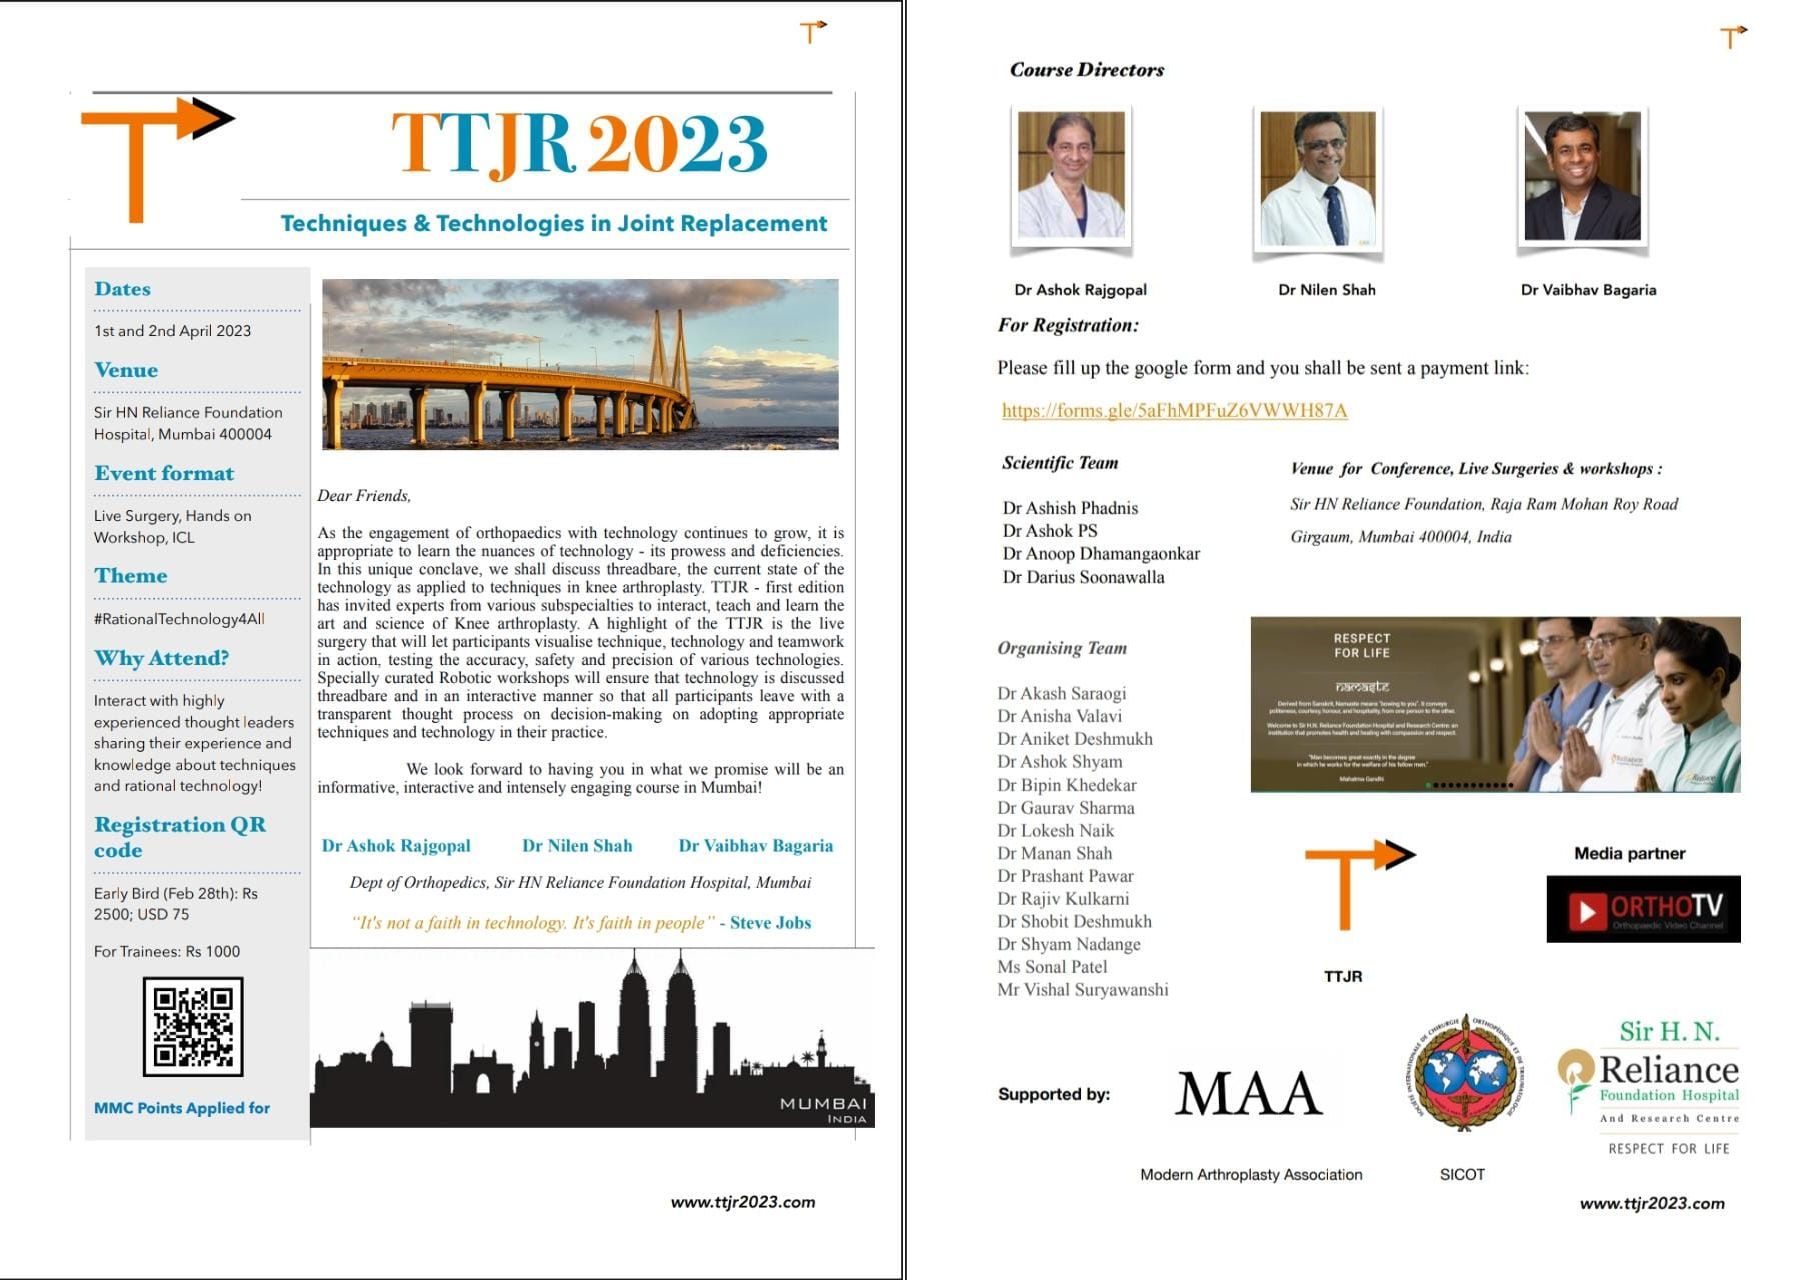 TTJR 2023 Techniques & Technologies in Joint Replacement